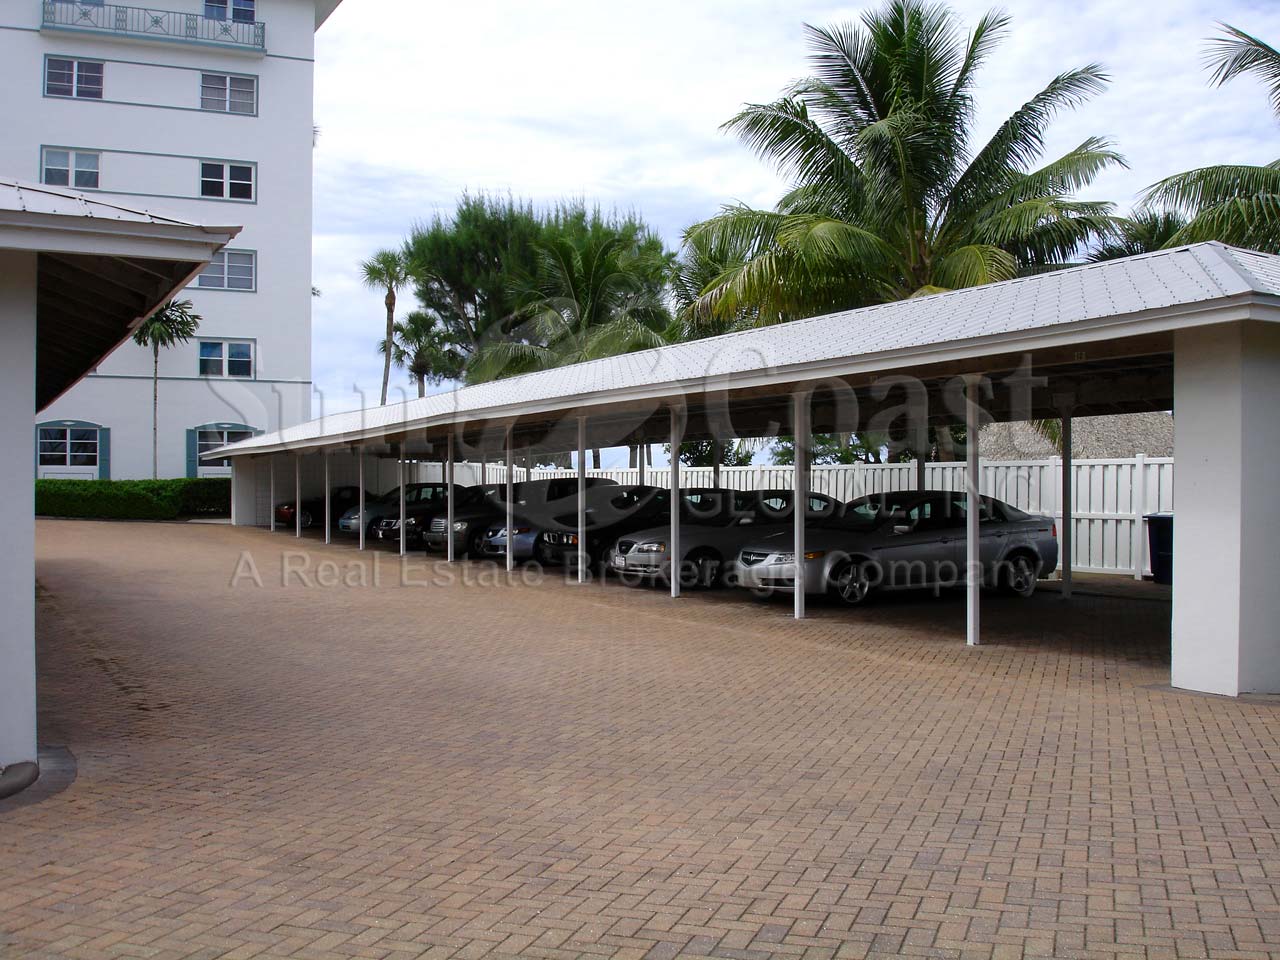 Carriage Club Covered Parking